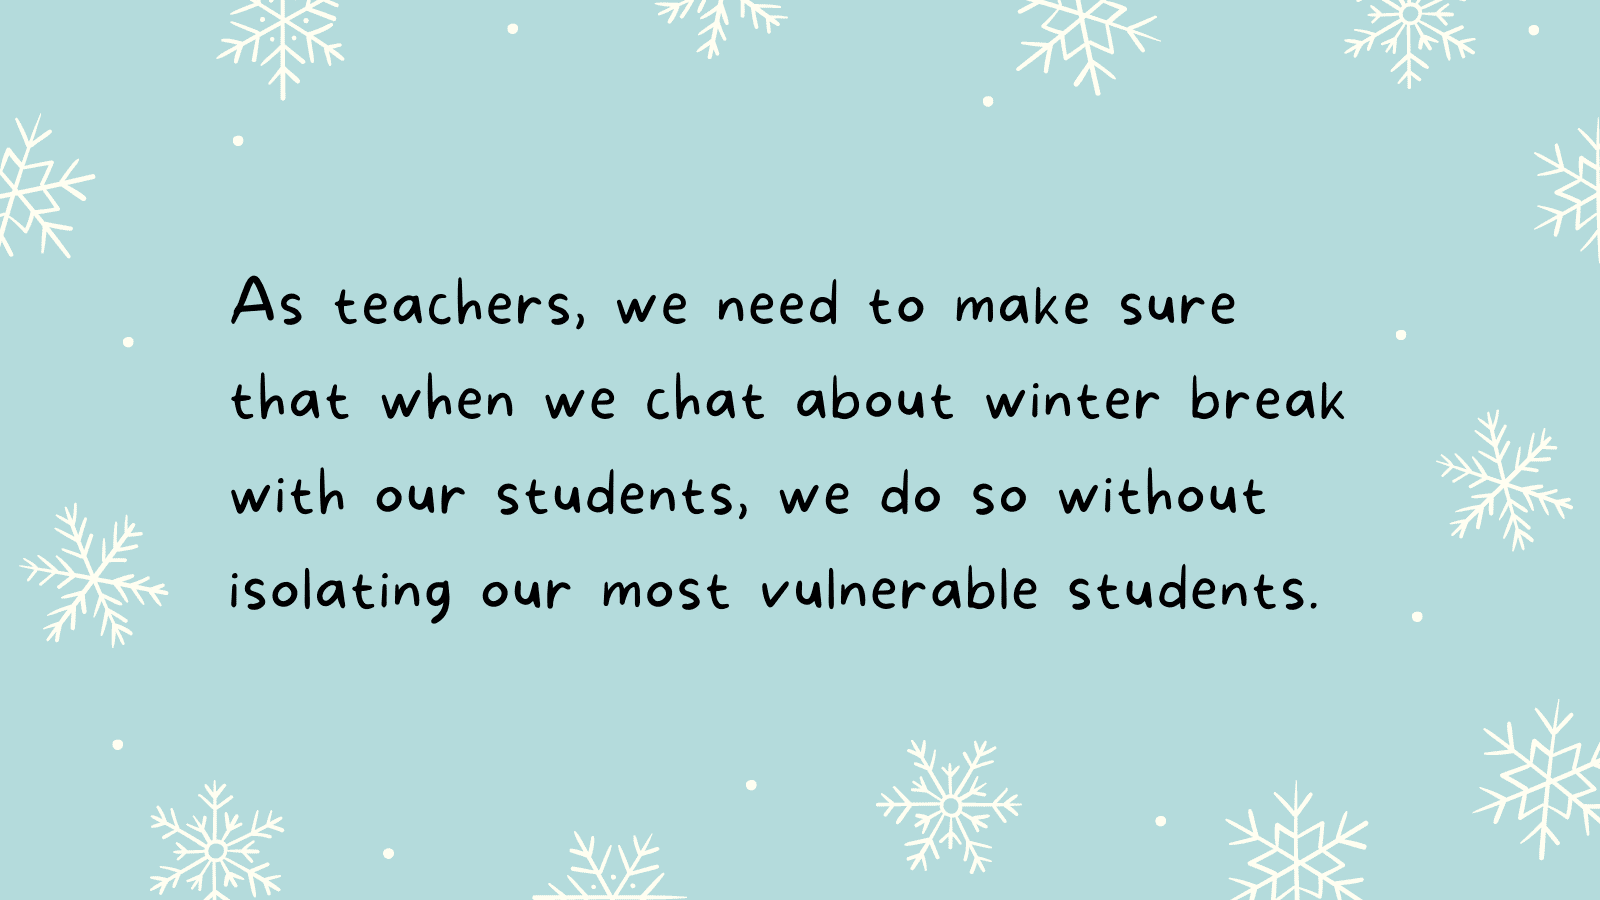 As teachers, we need to make sure that when we chat about winter break with our students, we do so without isolating our most vulnerable students.